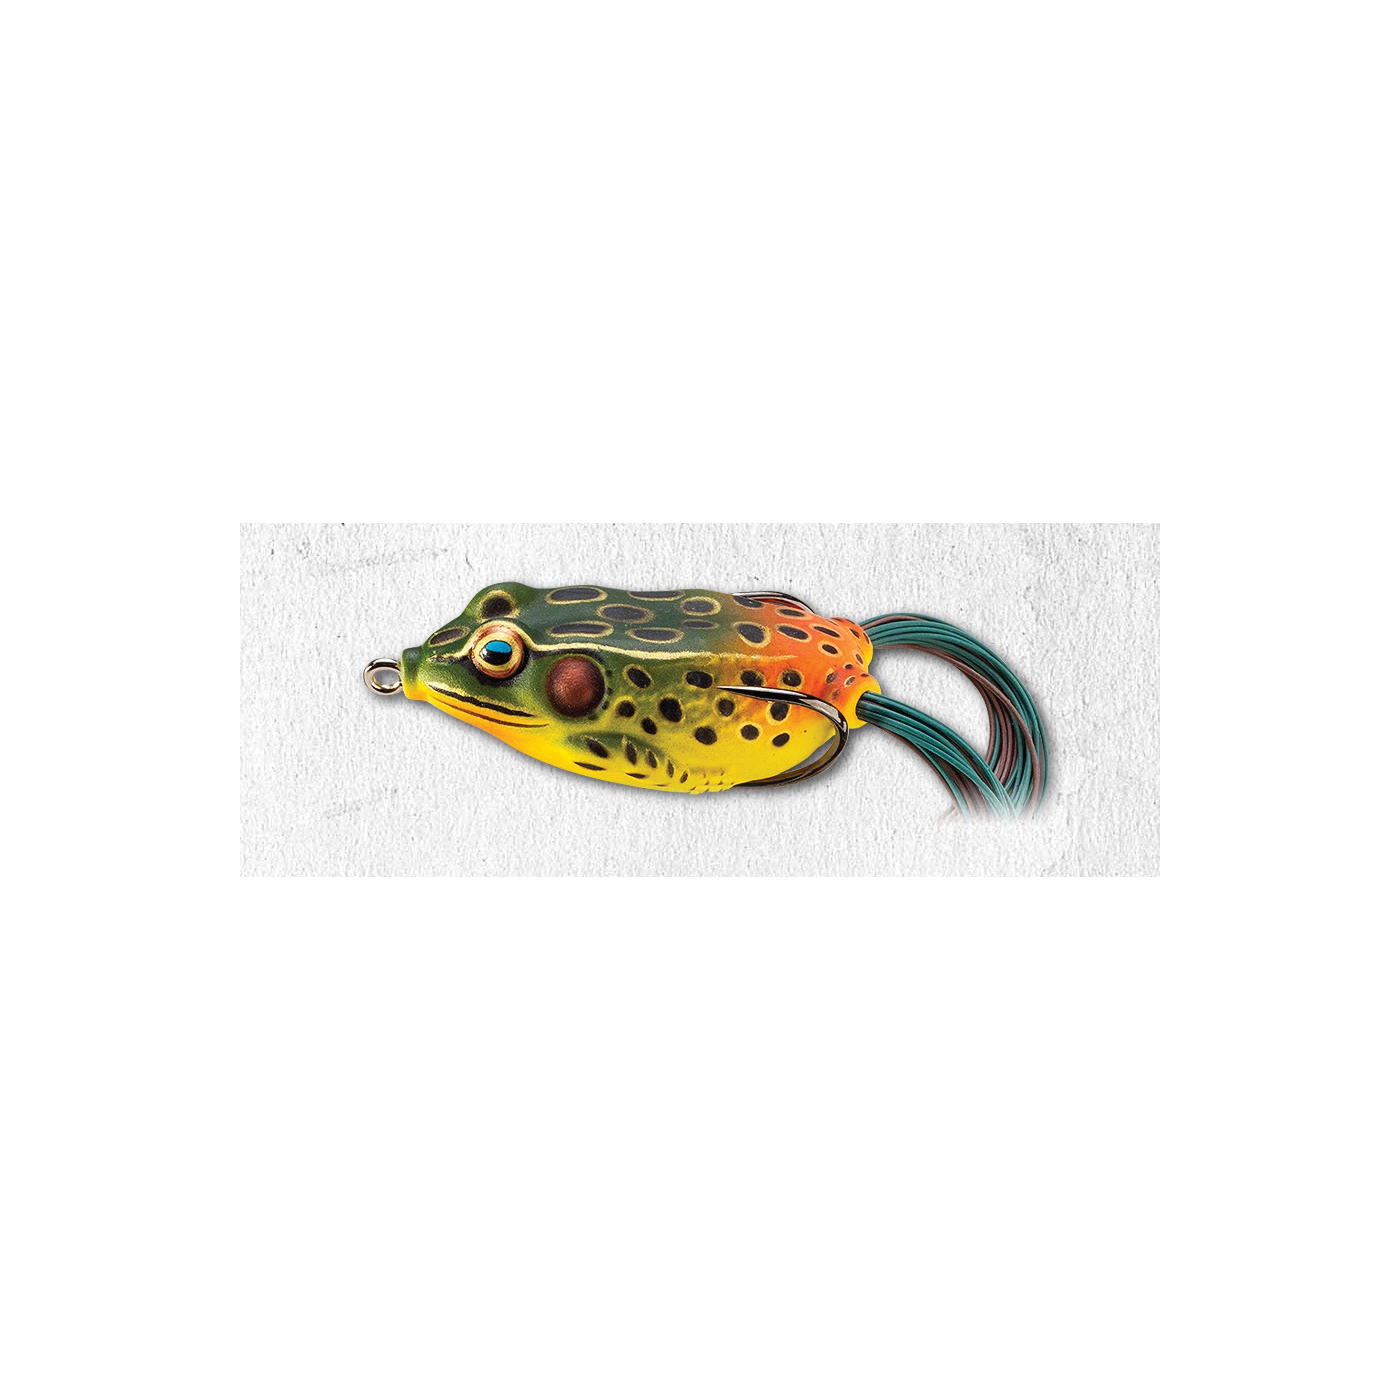 Livetarget FGH65T519 Fishing Lure, Frog, Emerald/Red Lure - 1